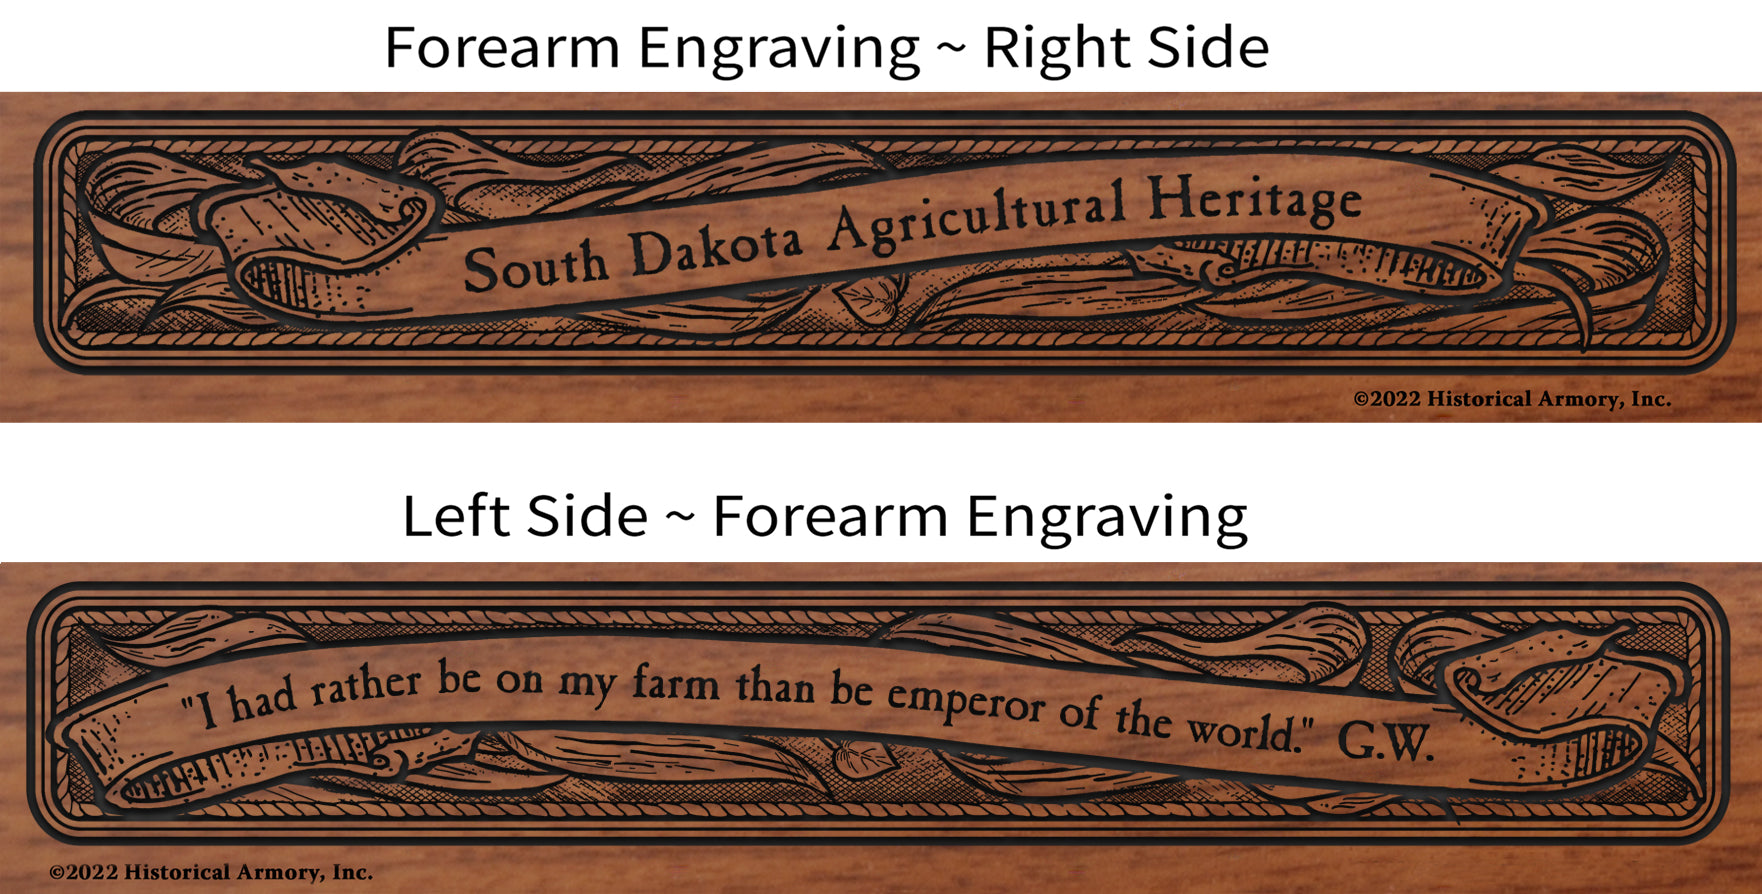 South Dakota Agricultural Heritage Engraved Rifle Forearm